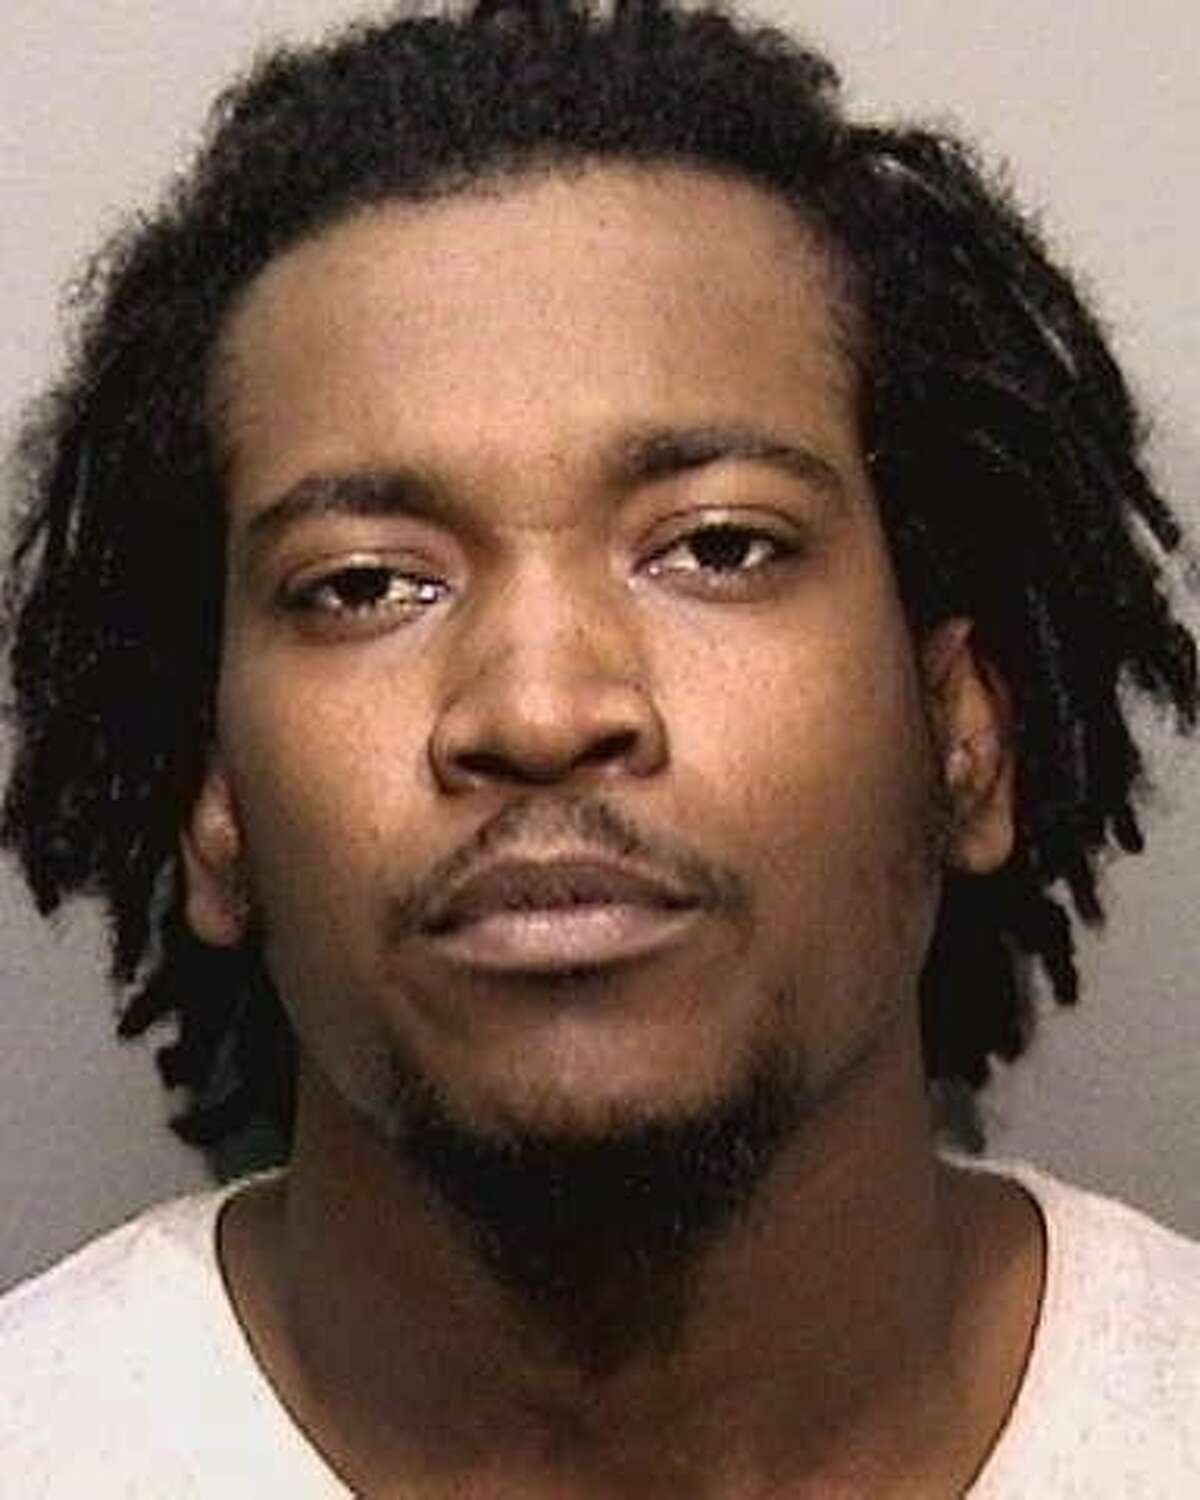 Giovonni Gaines was arrested Nov. 1, 2018, in connection to an IED that exploded during an Oakland march in July and injured 10 officers.